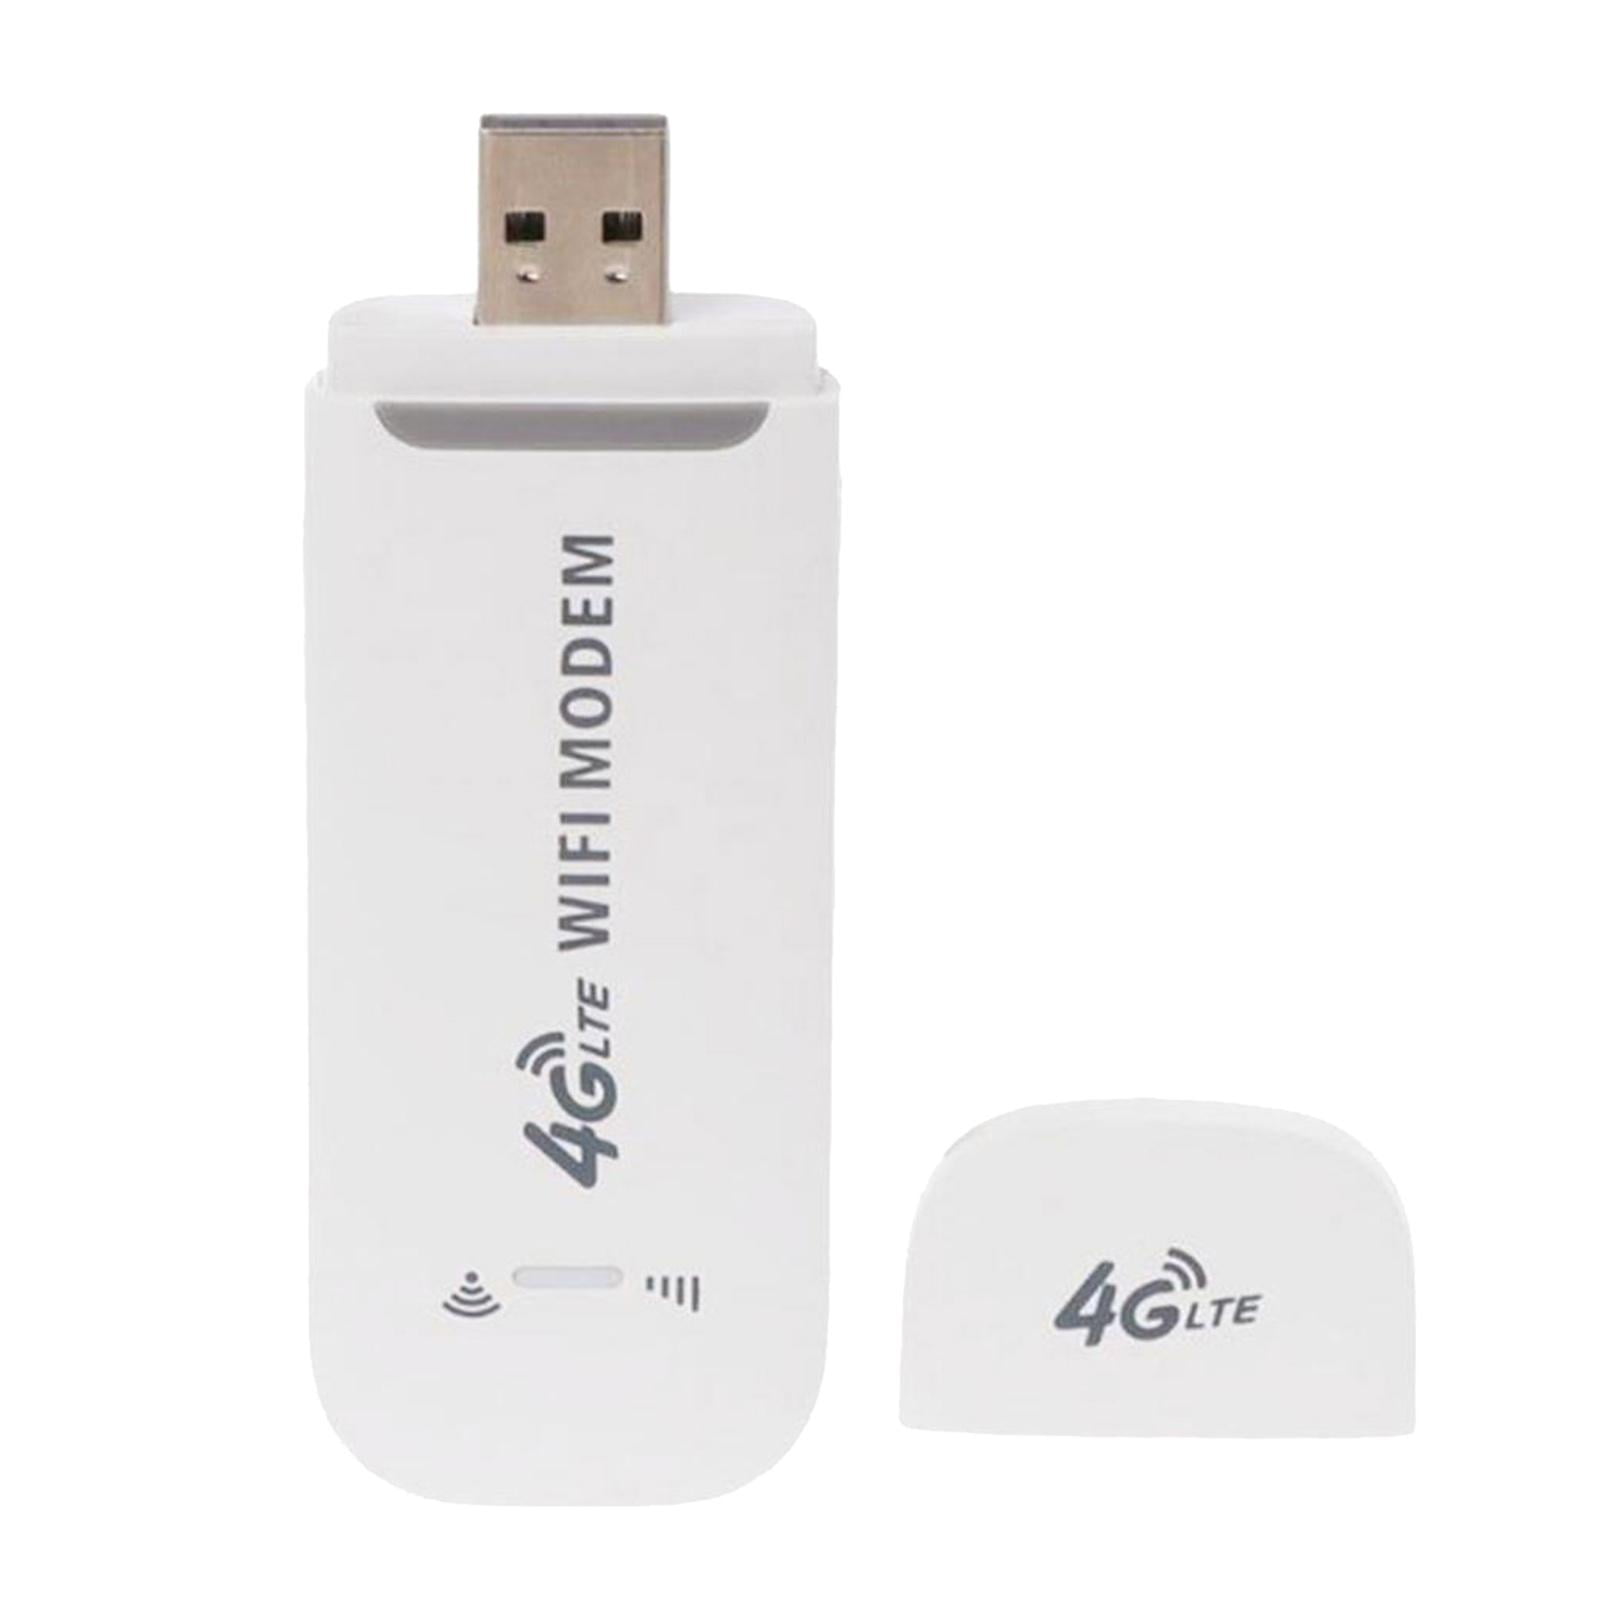 4G LTE USB Modem Dongle Stick 150Mbps Sim Card Network Adapter for Laptop | Walmart Canada